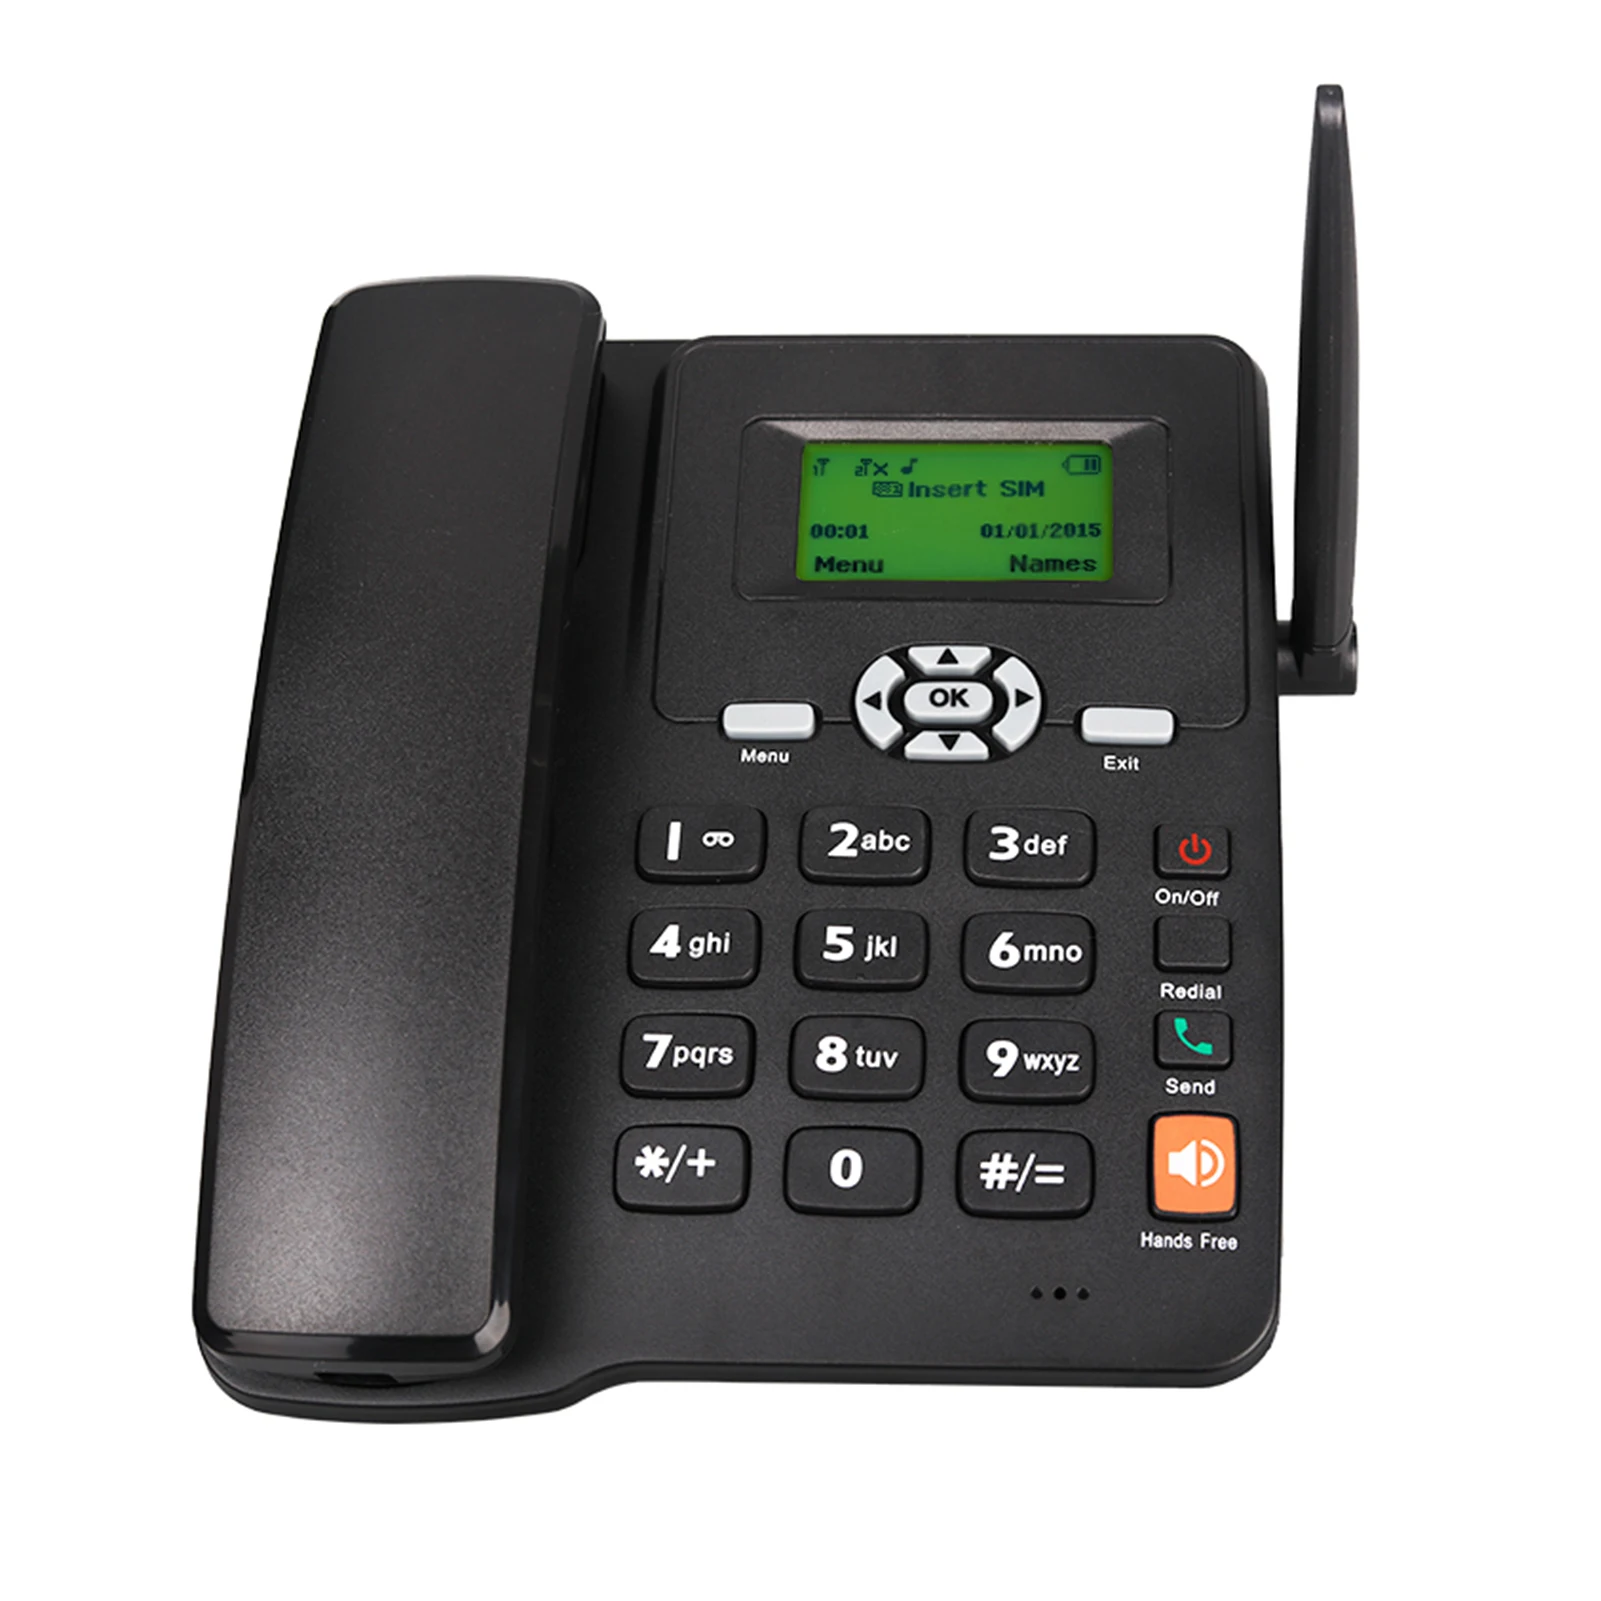 Cordless Phone Desktop Telephone Support GSM 850/900/1800/1900MHZ Dual SIM Card 2G Fixed Wireless Phone with Antenna Radio Alarm